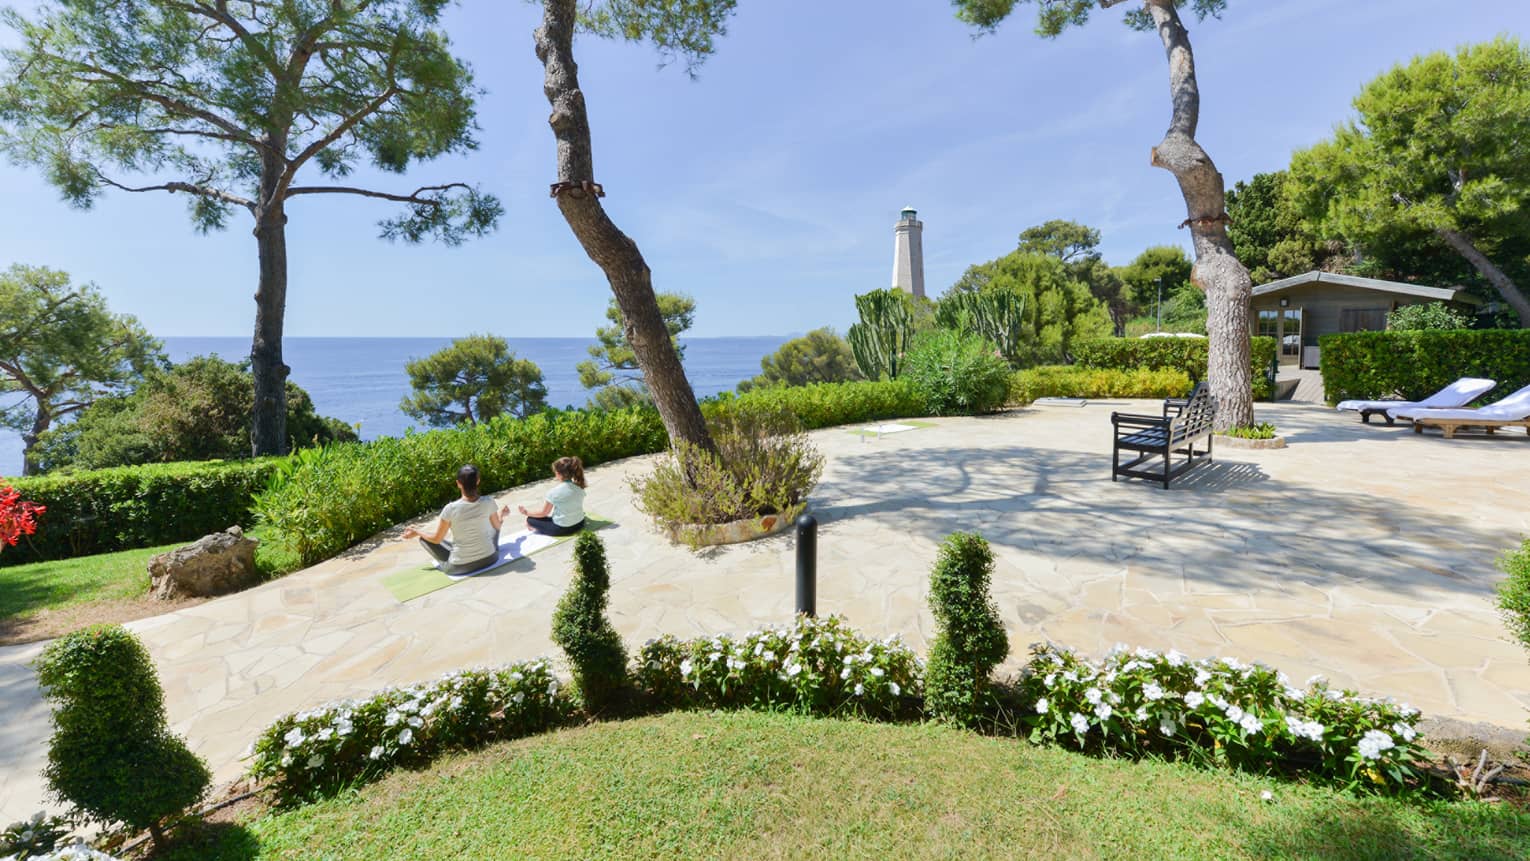 Rear view of two people in a seated yoga pose on curved patio with lush greenery, sea and lighthouse view